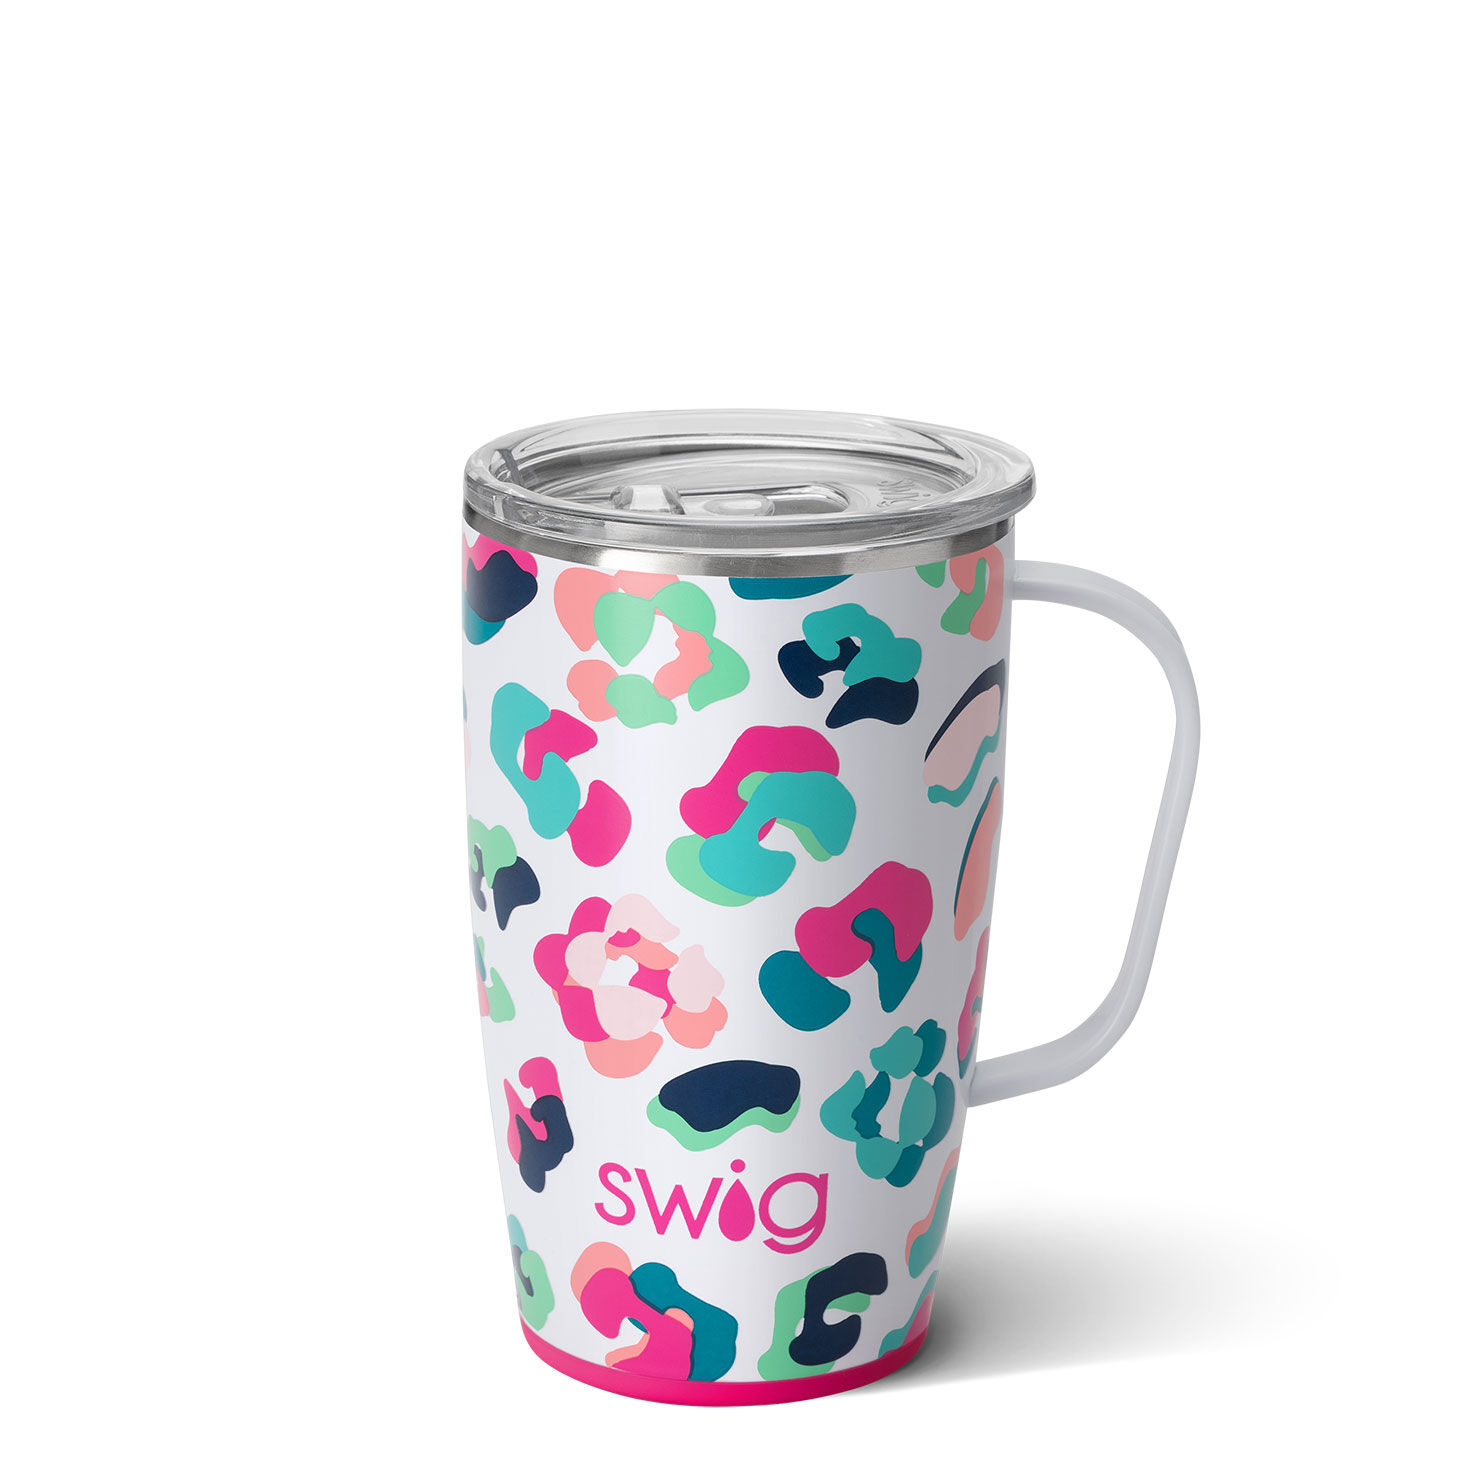 Swig Party Animal Stainless Steel Travel Mug, 18 oz. - Insulated